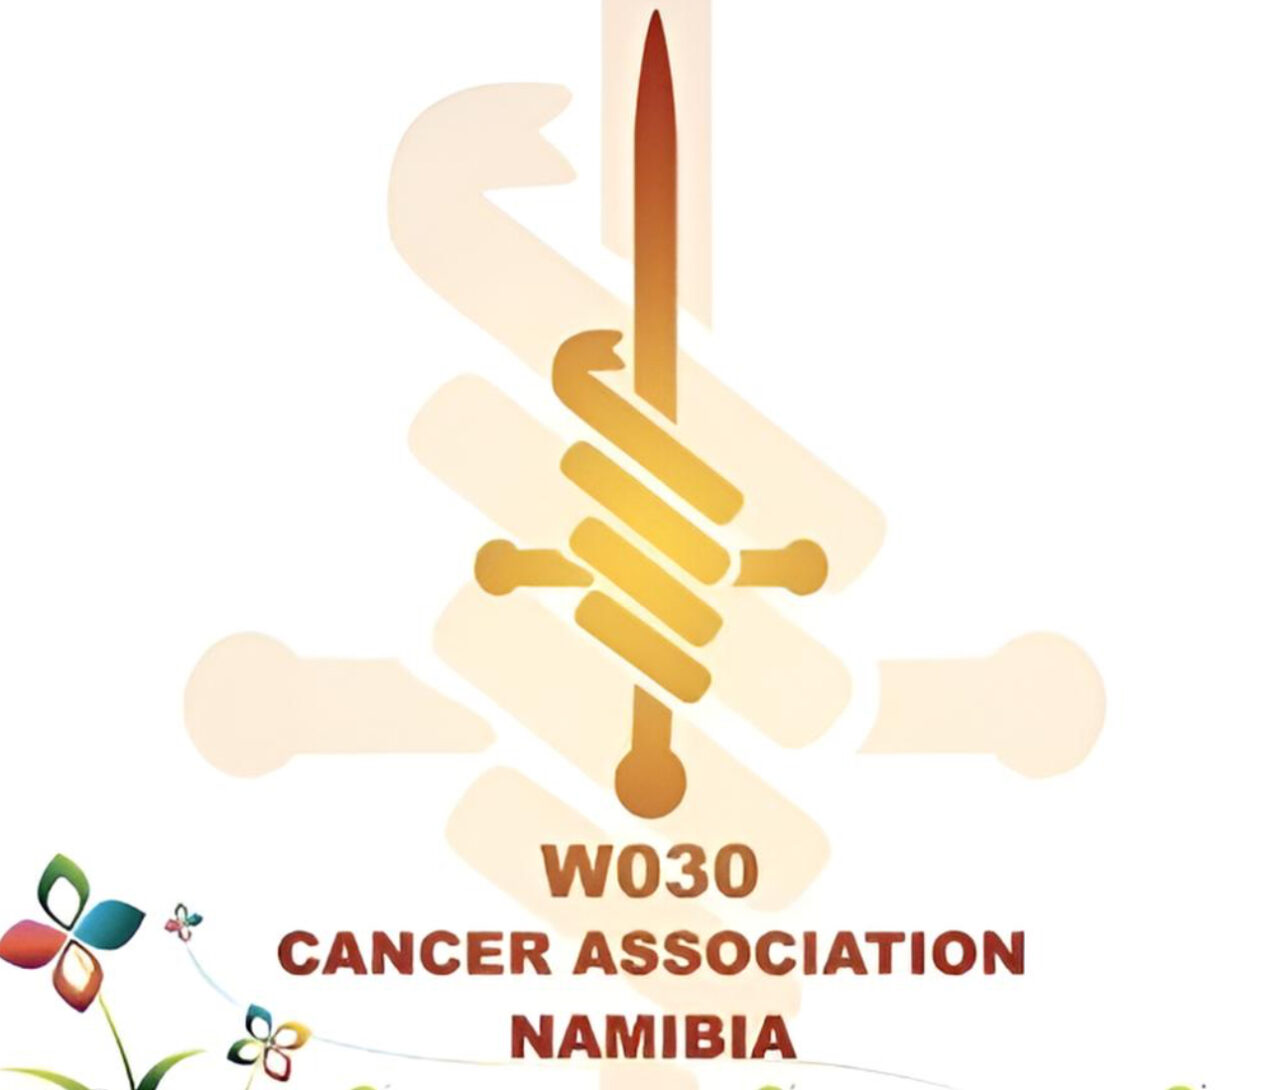 ‘Every life matters, we leave no one behind!’ – Cancer Association of Namibia (WO30)